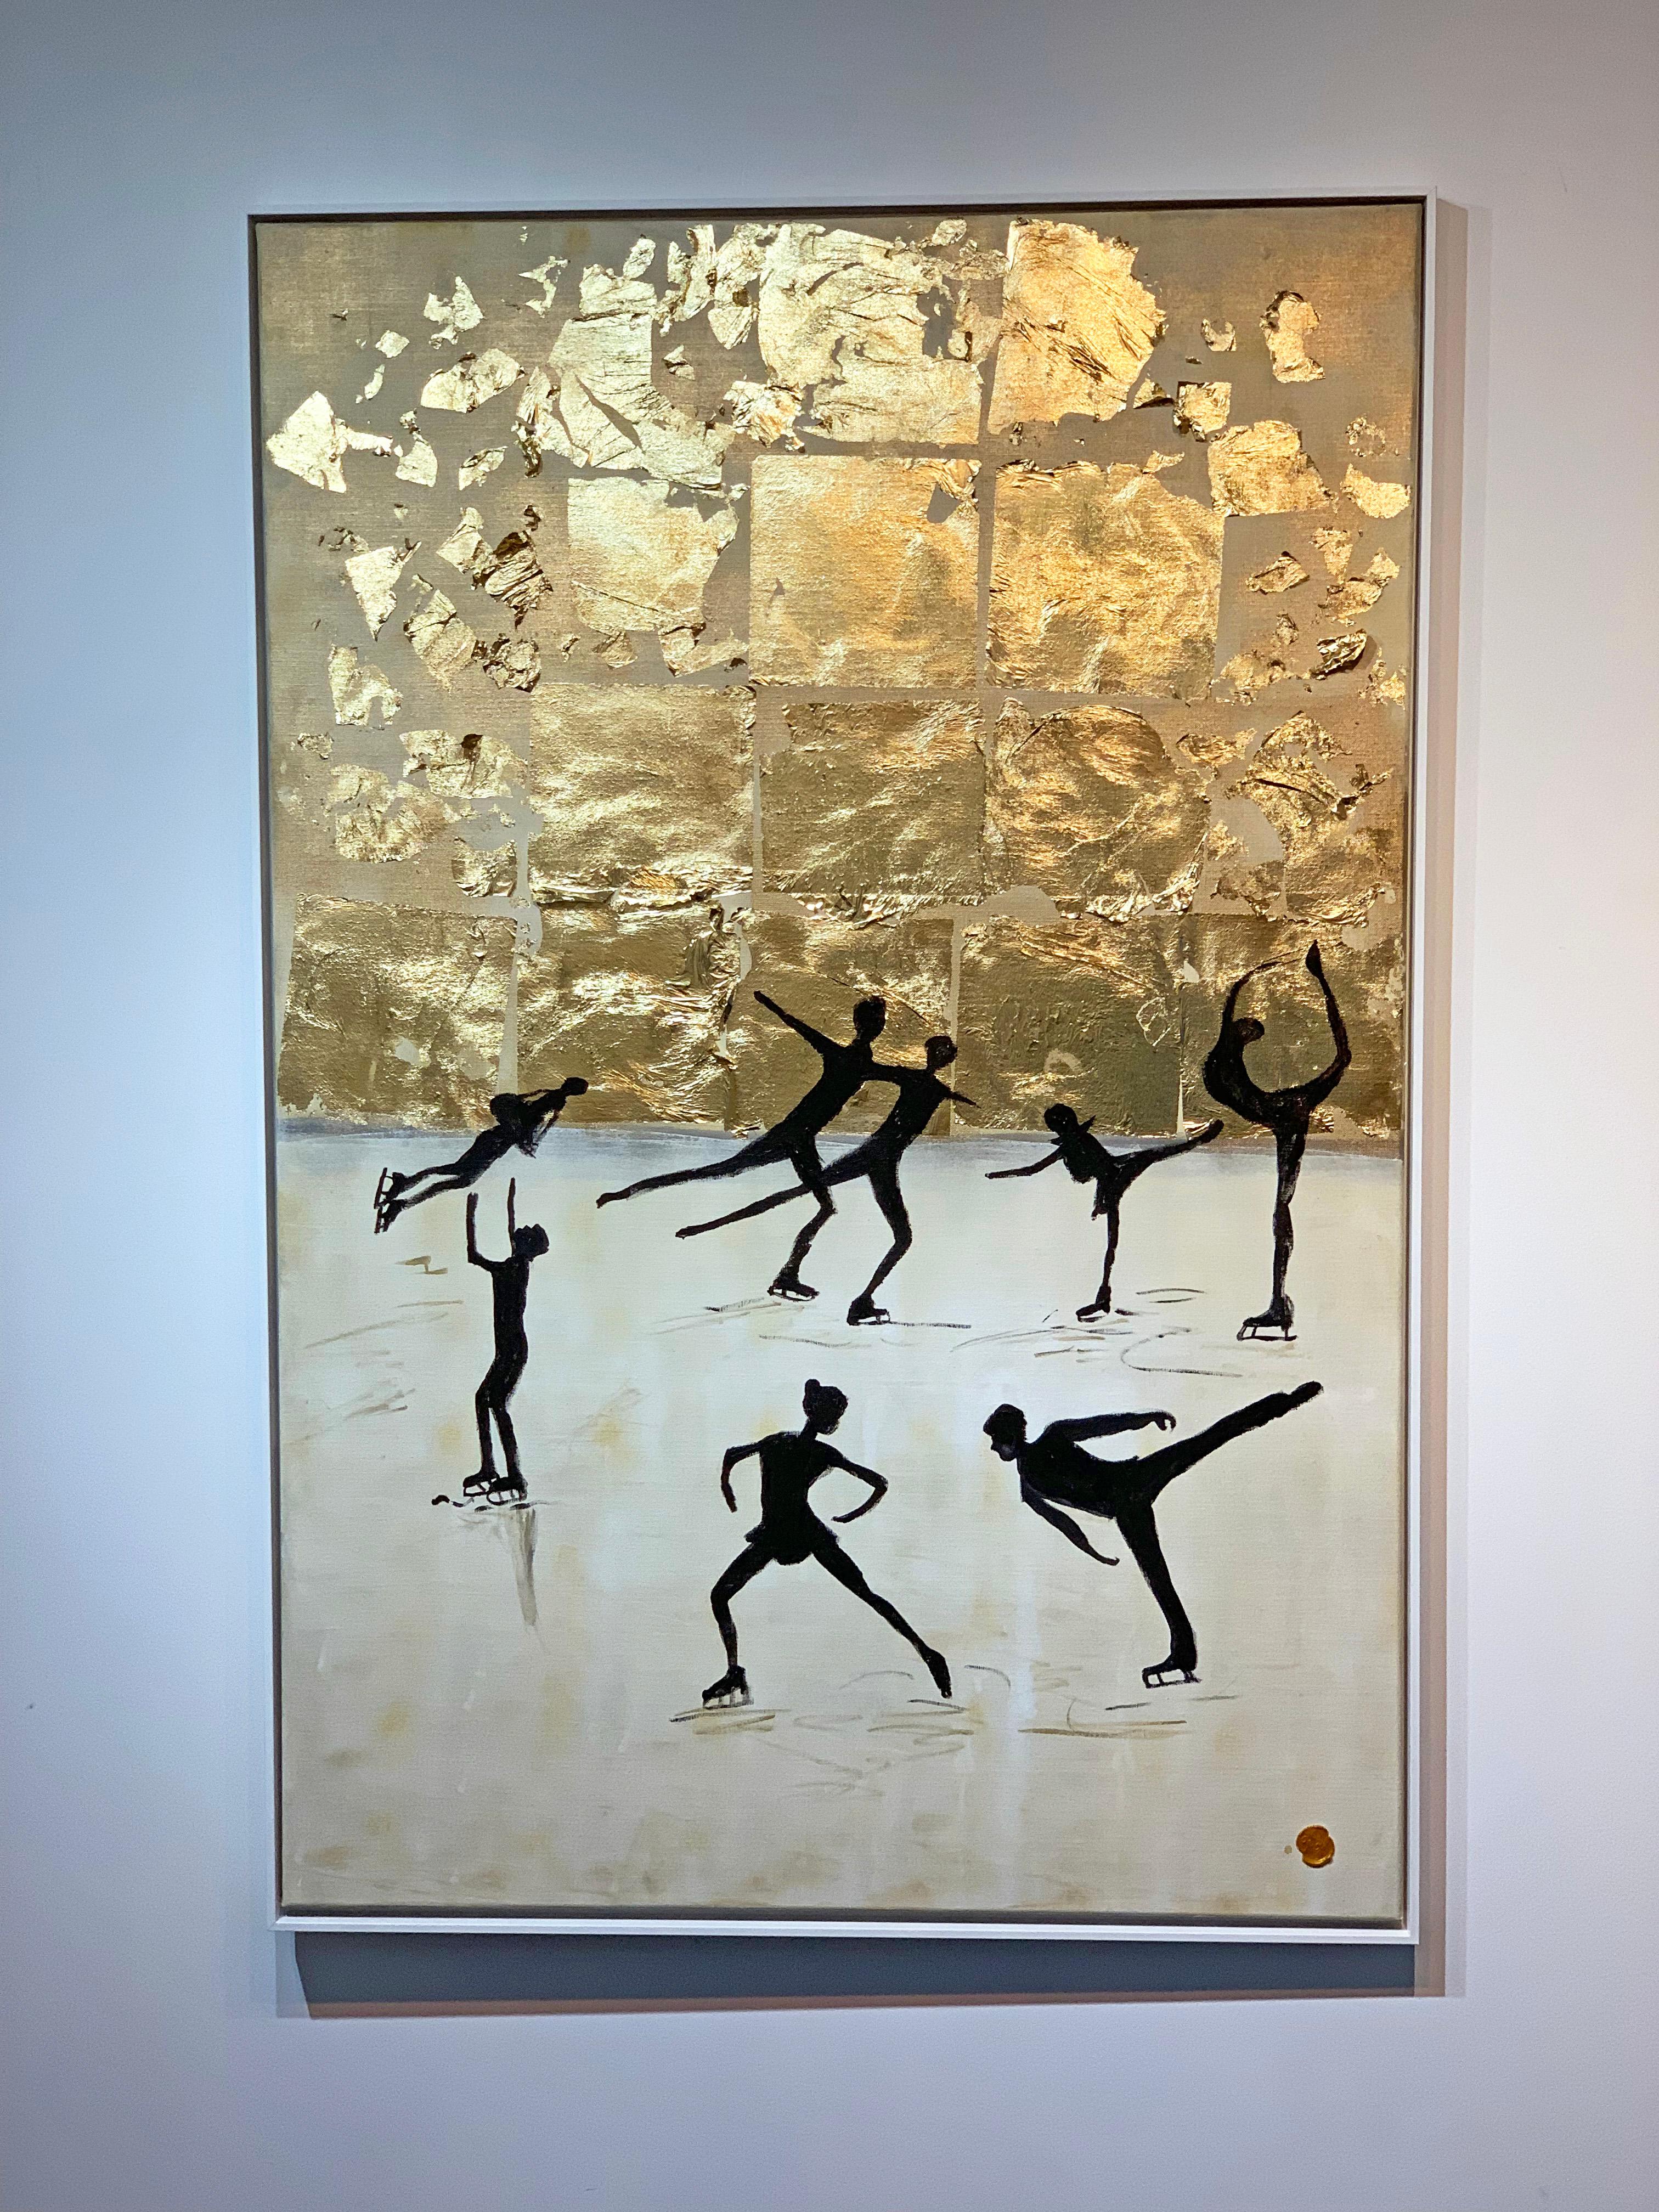 Dancing on Ice by K. Hormel - Gold Contemporary abstract Oil painting - Painting by Katharina Hormel